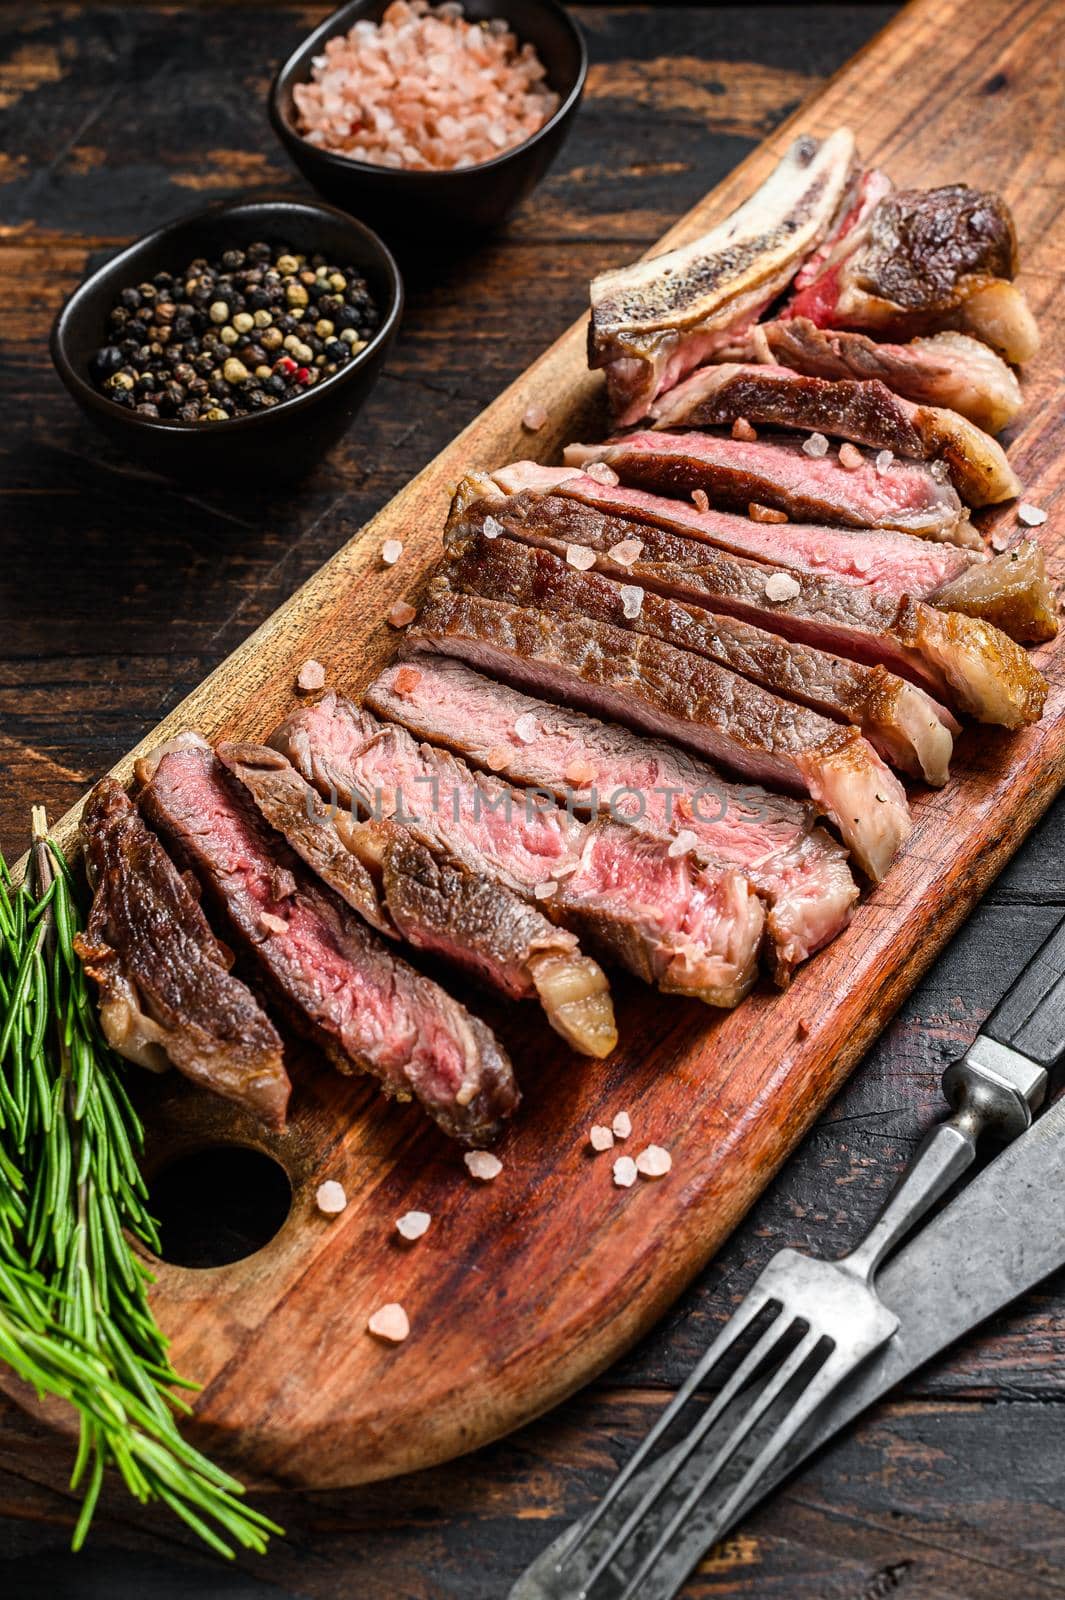 Grilled cowboy or rib eye beef steak with herbs and spices. Wooden dark background. Top view